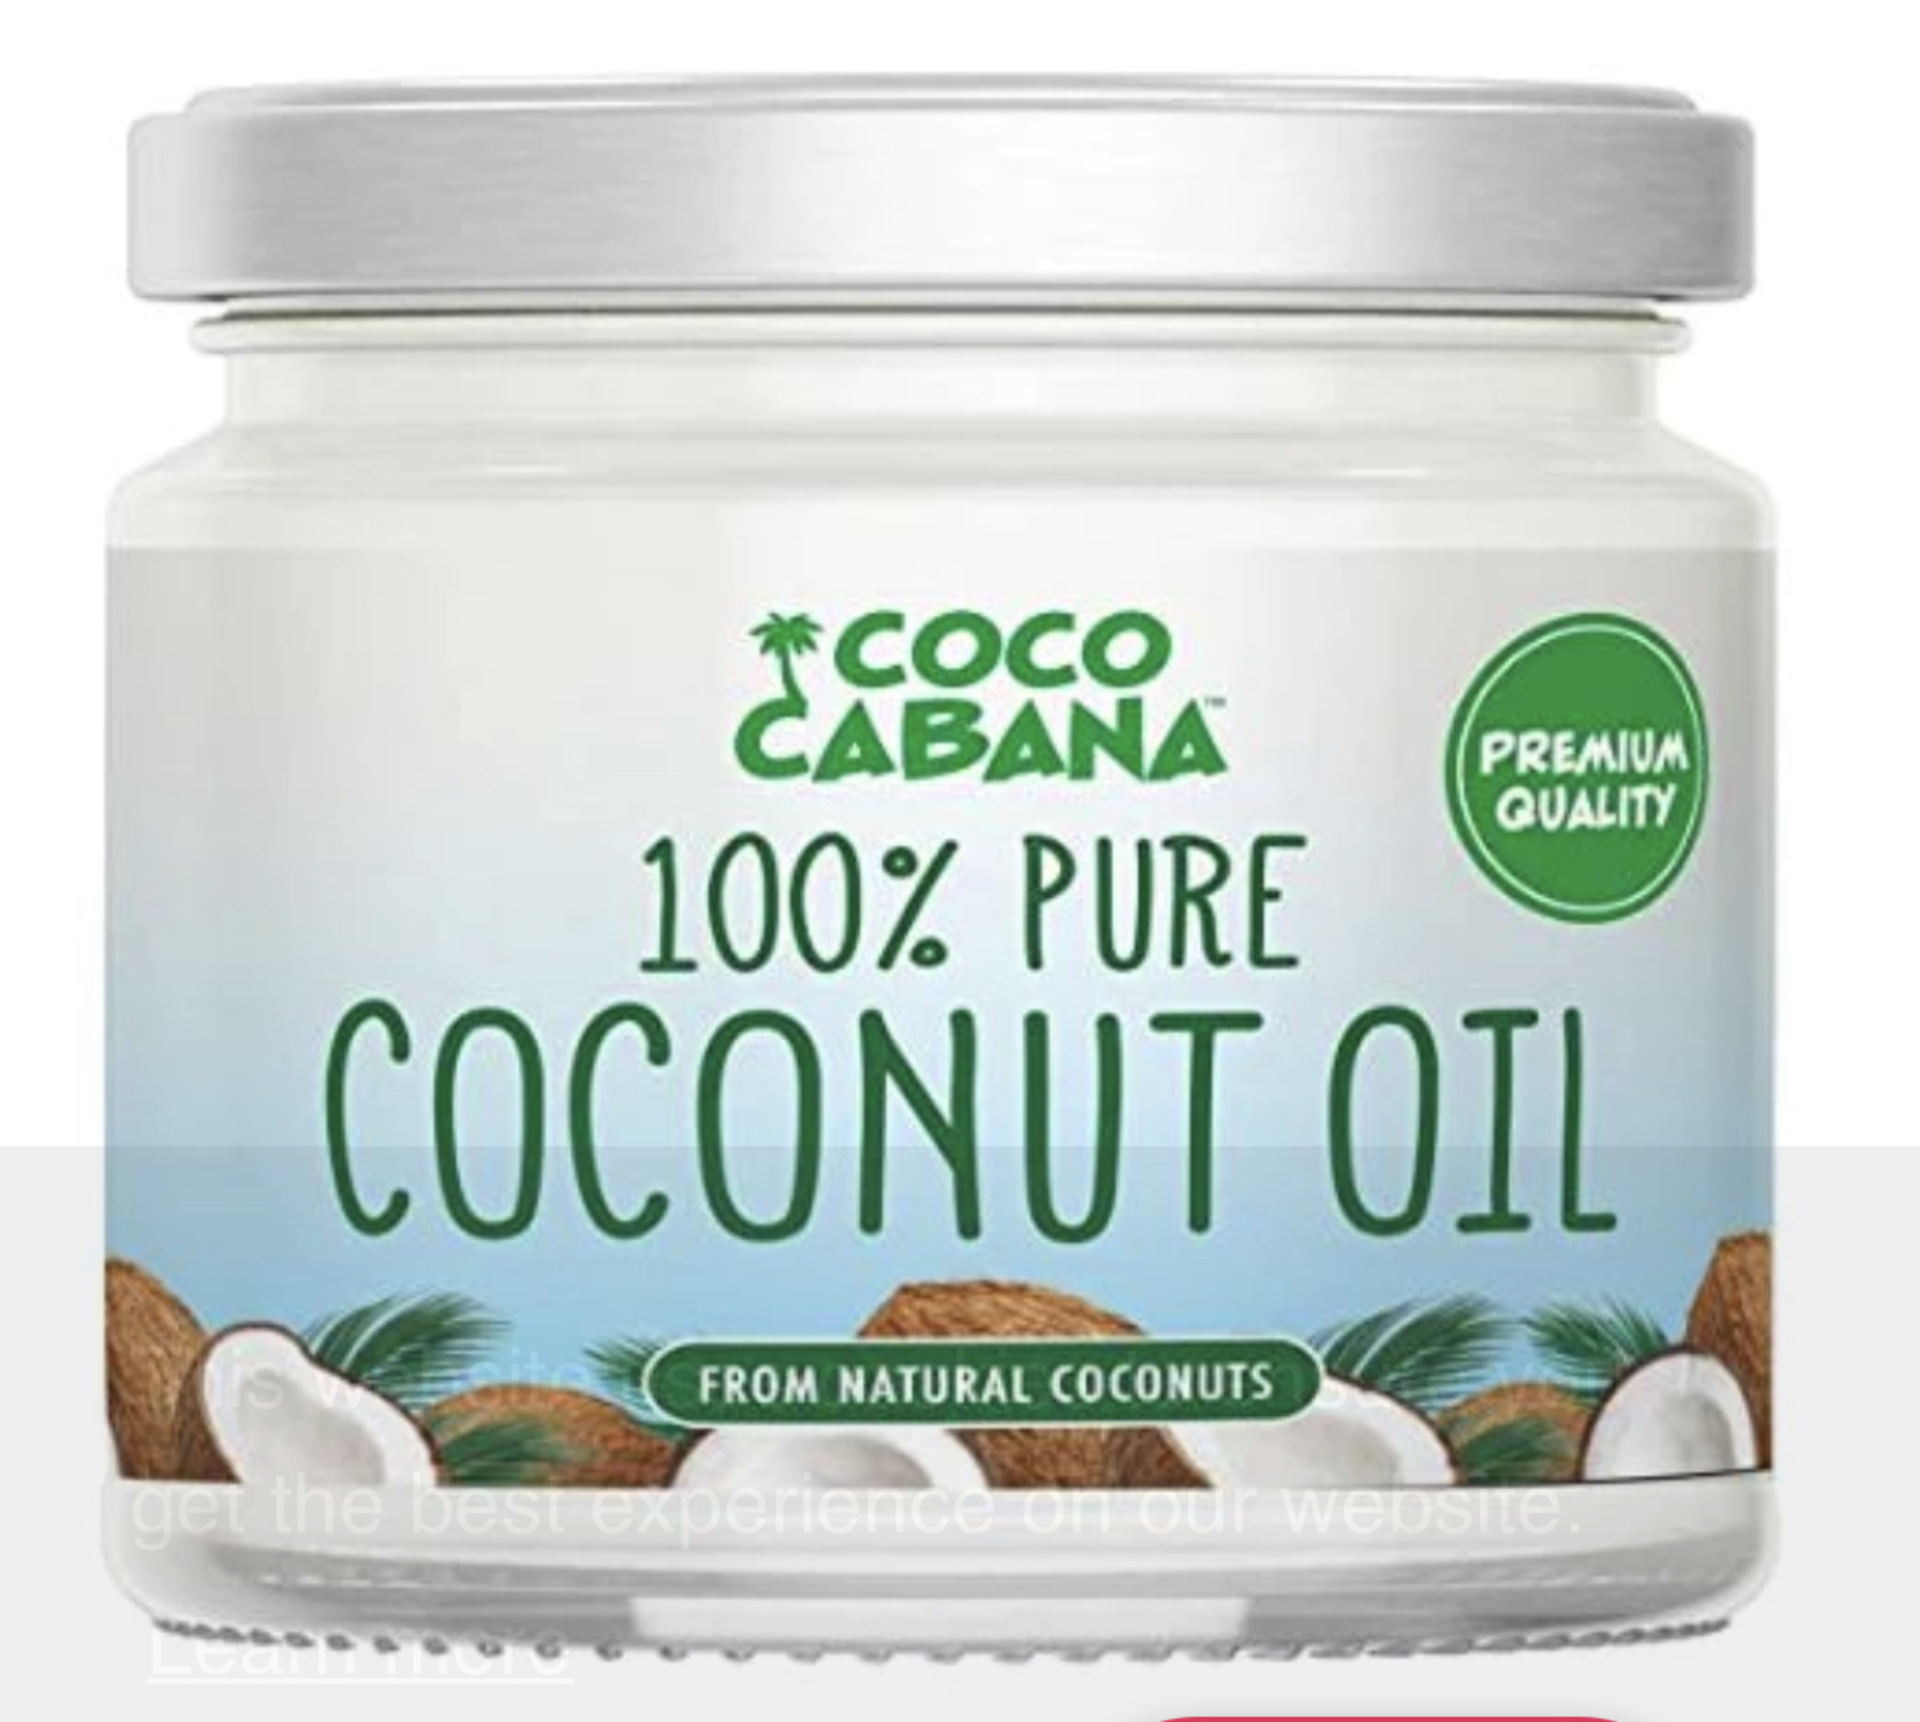 RRP £1293 (Approx Count 80)(C25) 16 x Coco Cabana 100% Pure Coconut Oil 300ml , Vegan Gluten & Dairy